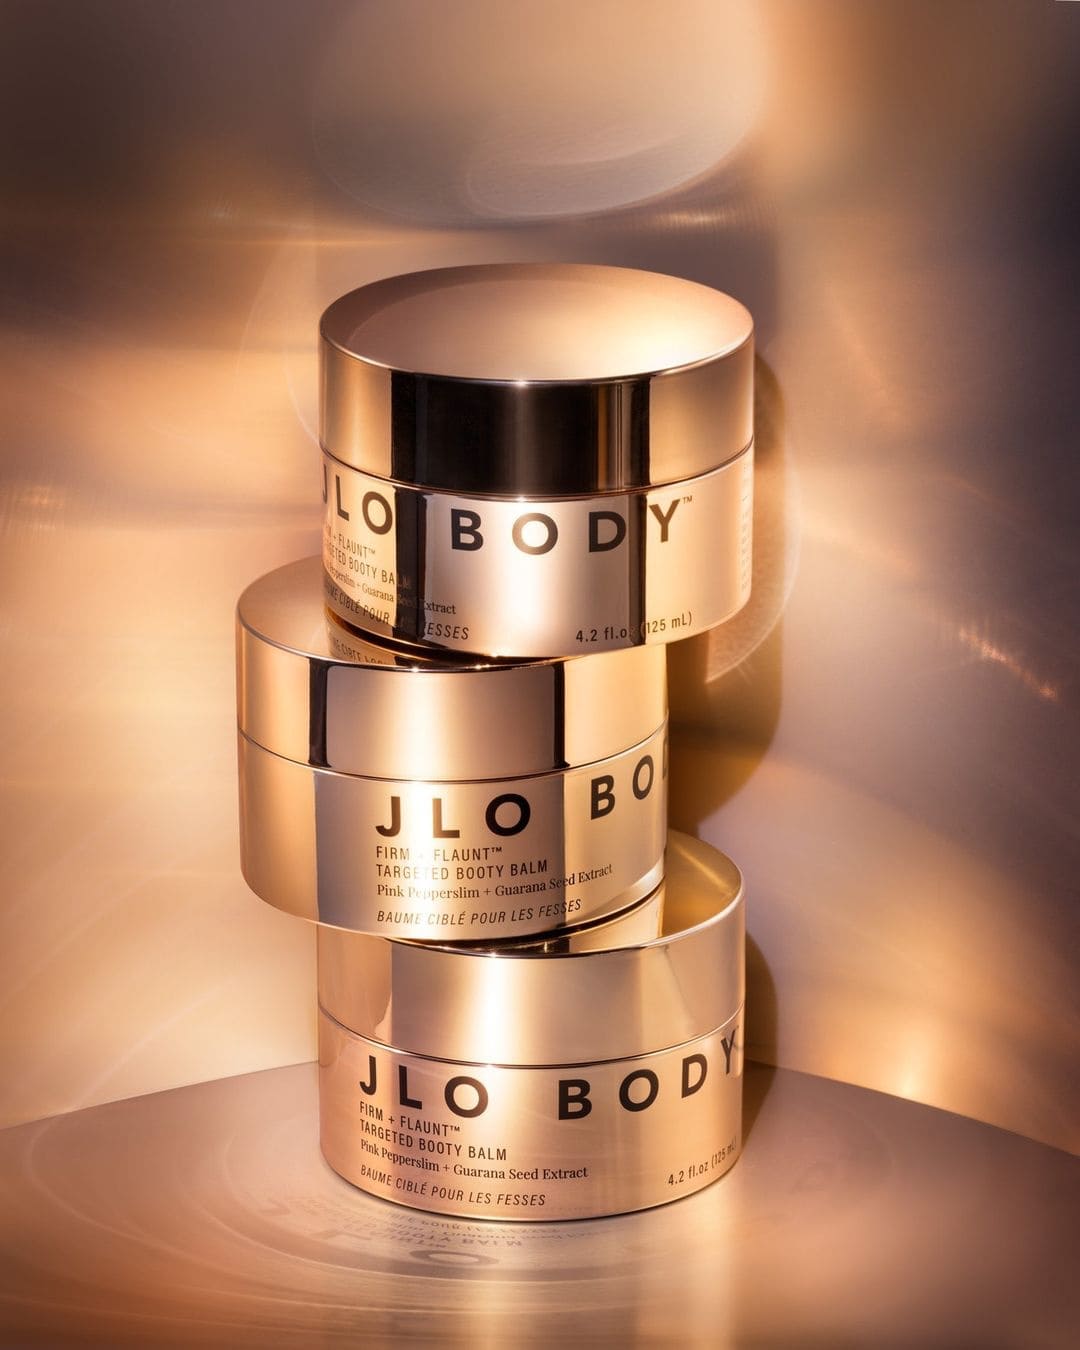 Introducing the JLo Body by JLo Beauty FIRM + FLAUNT Targeted Booty Balm